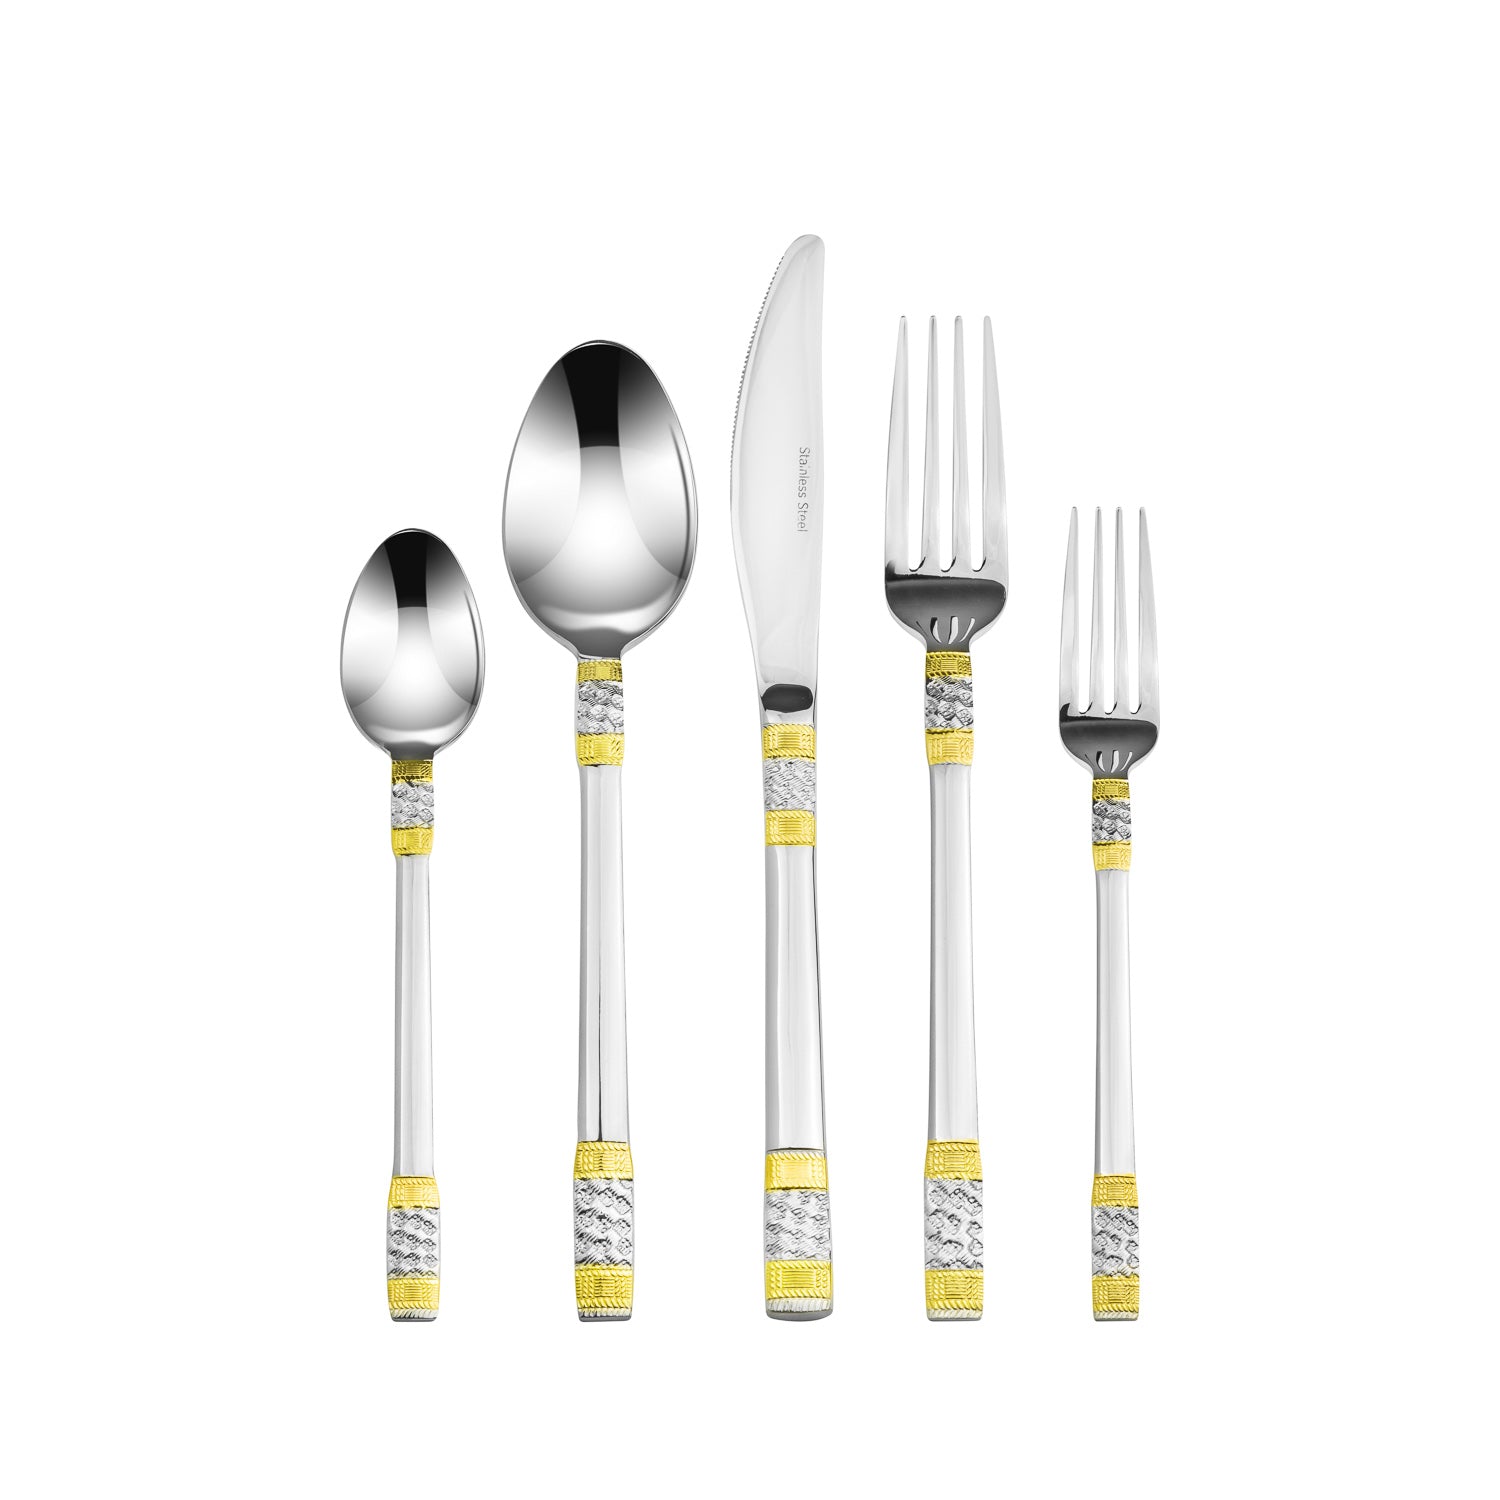 The essentials: 20 cutlery sets that made design history - Domus